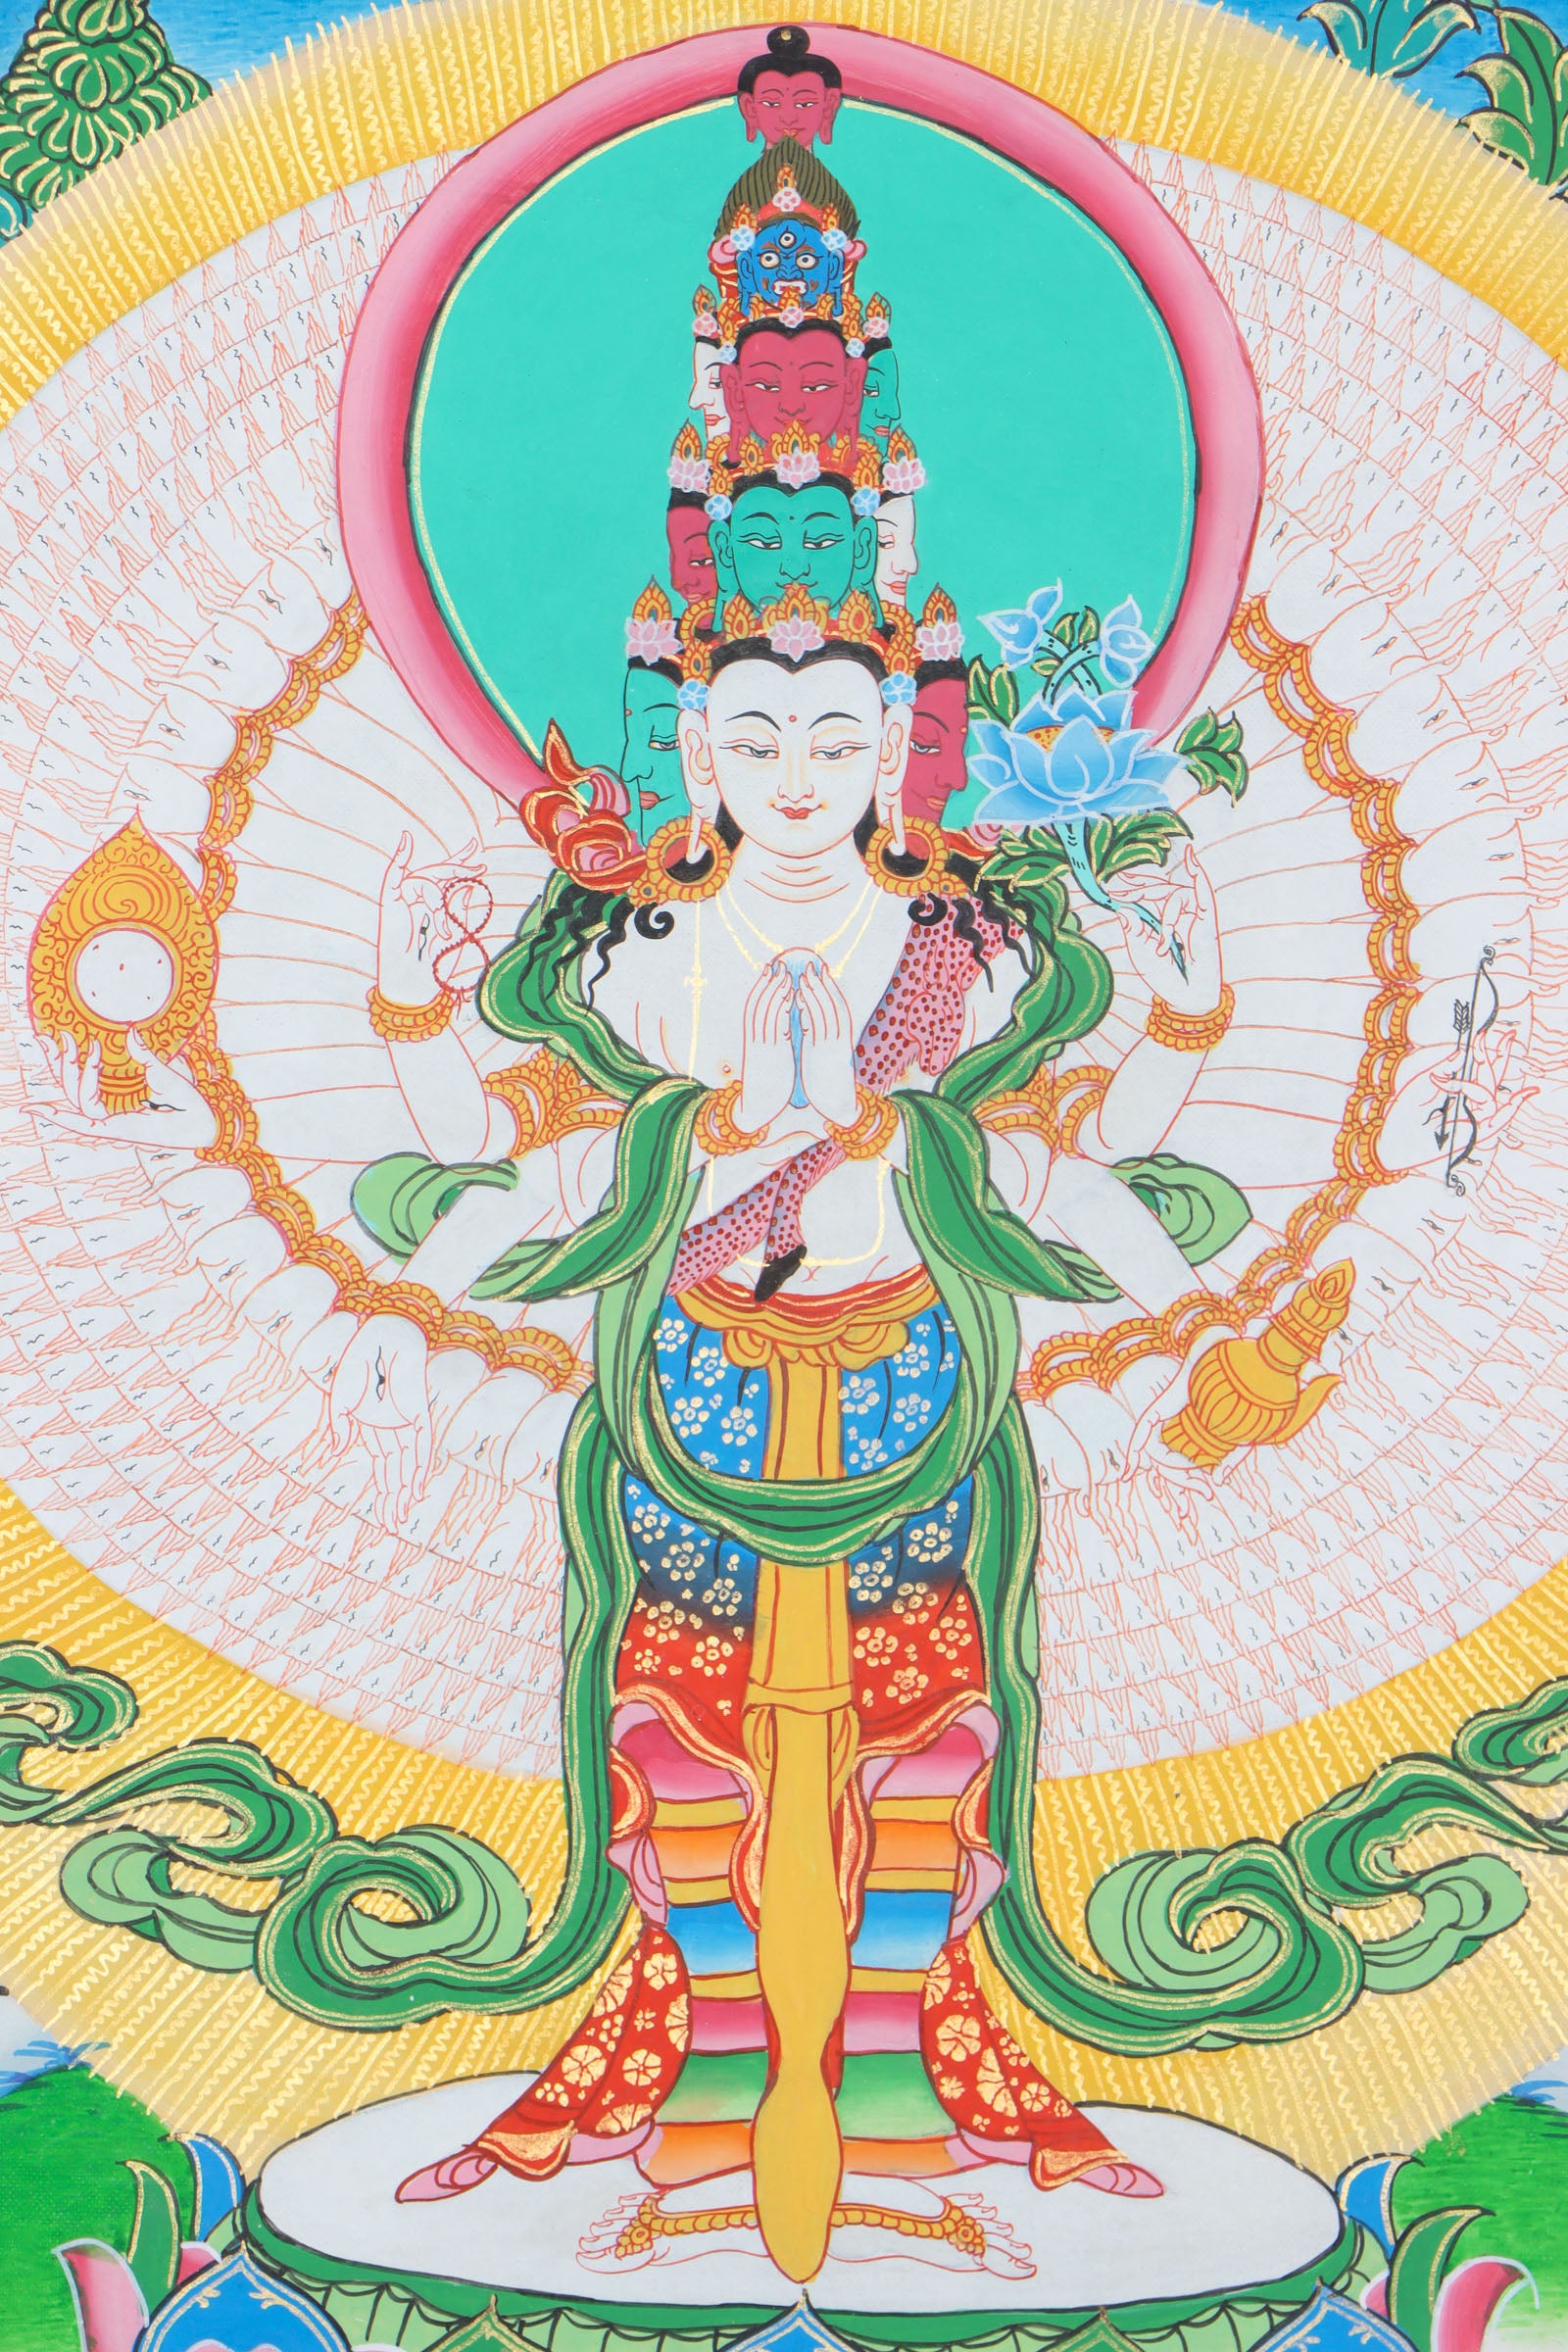 Lokeshwor Thangka serves as visual aids for meditation and visualization practices.